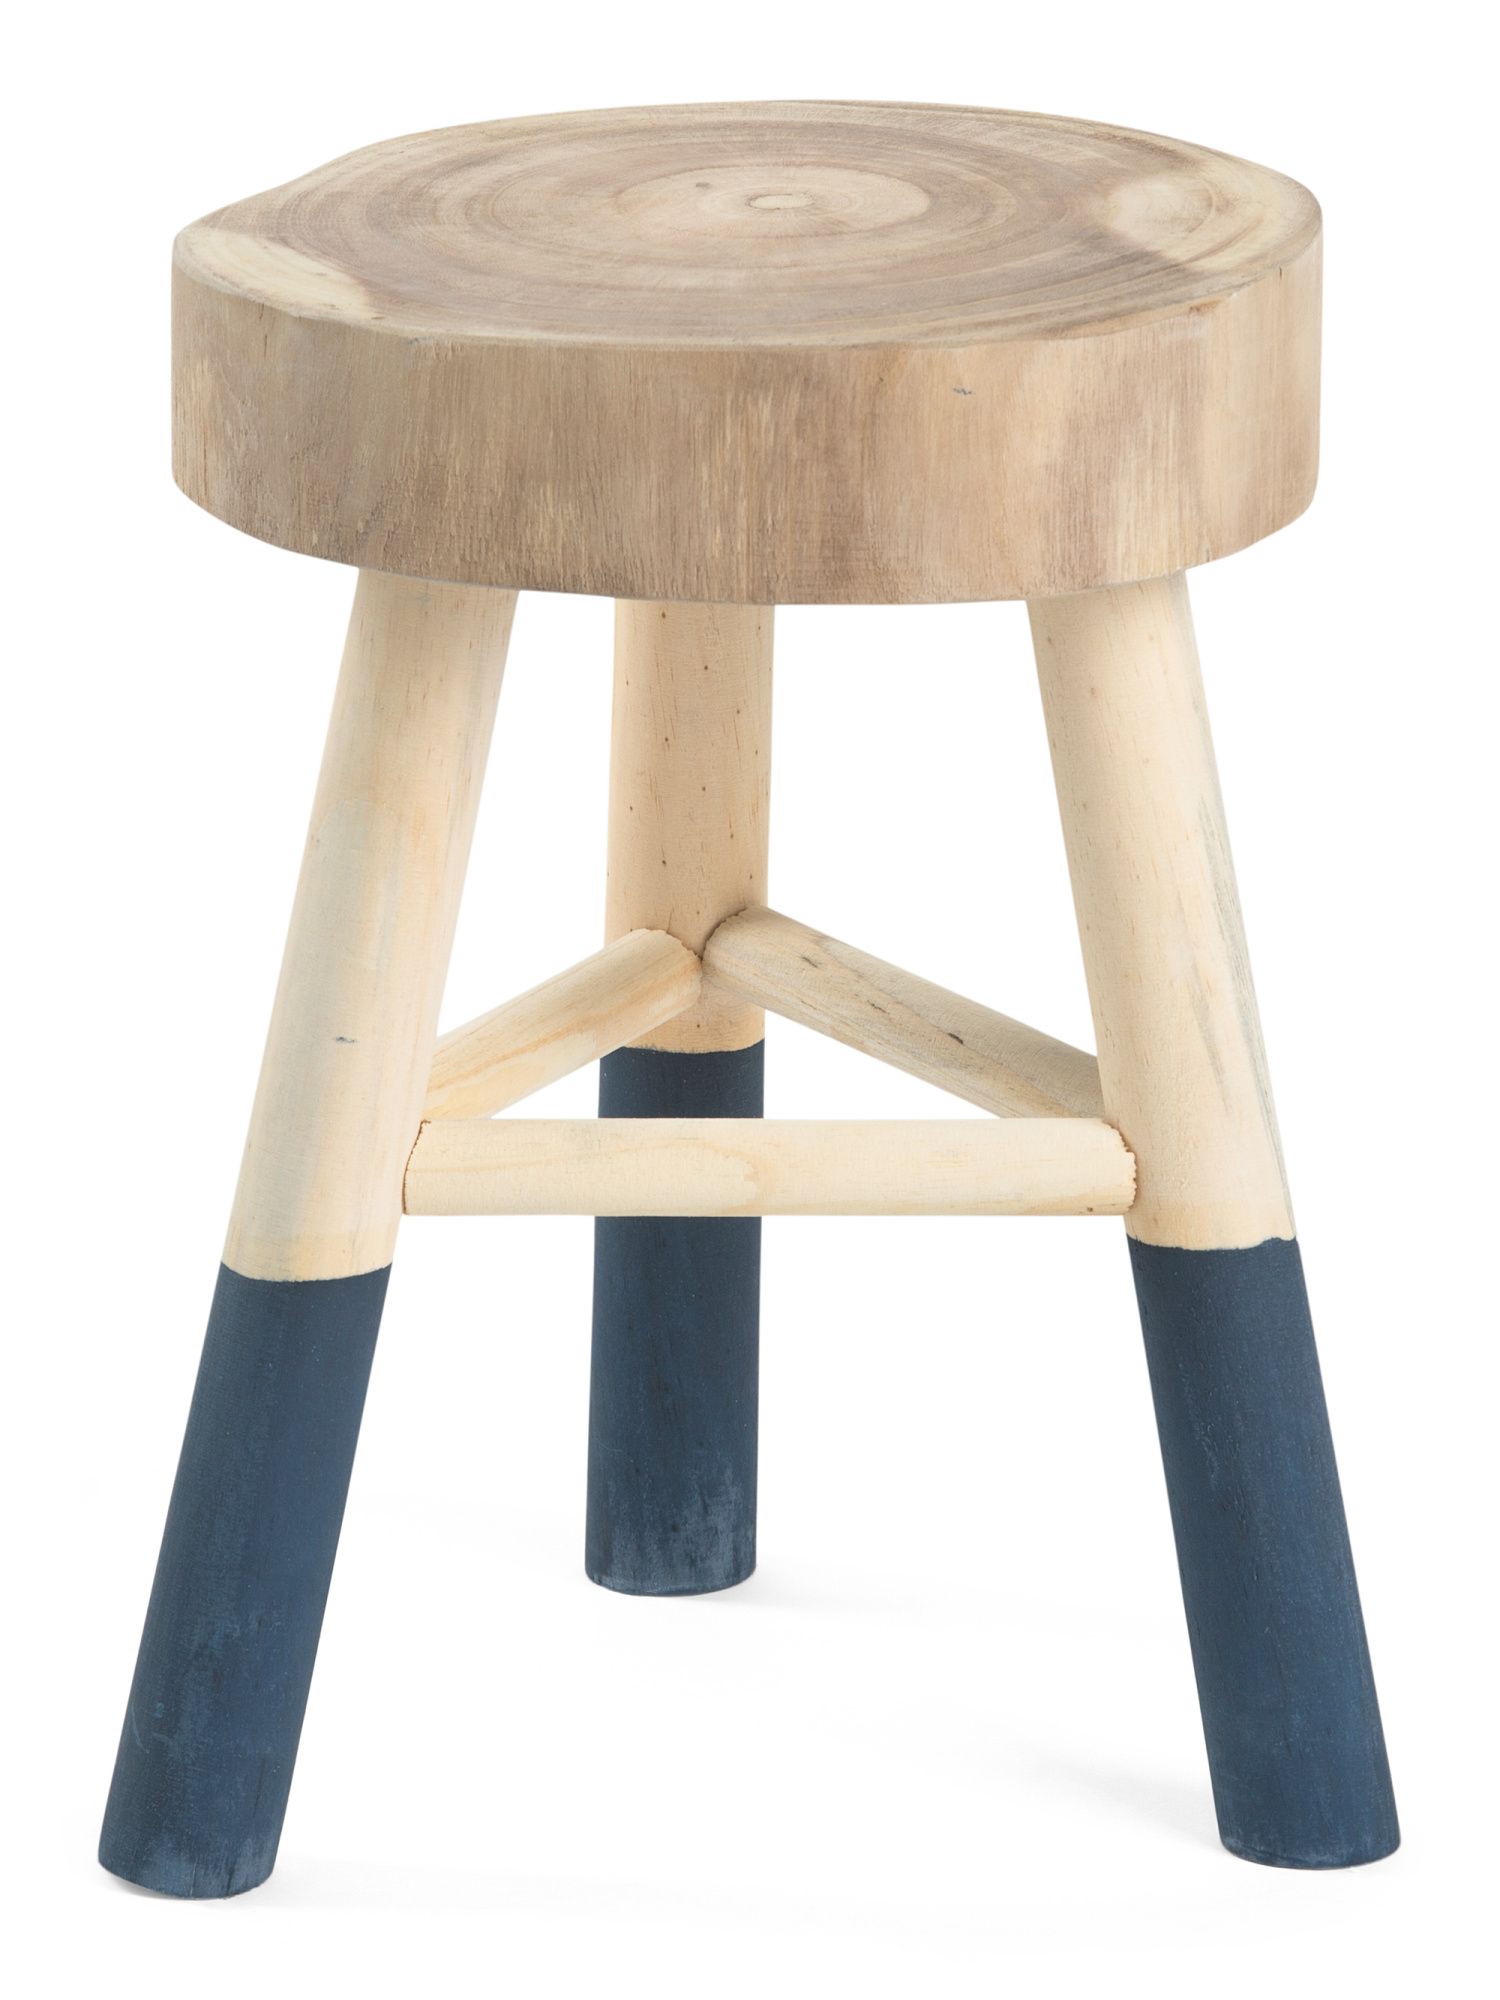 18in Wooden Stool With Dipped Legs | Decor | Marshalls | Marshalls